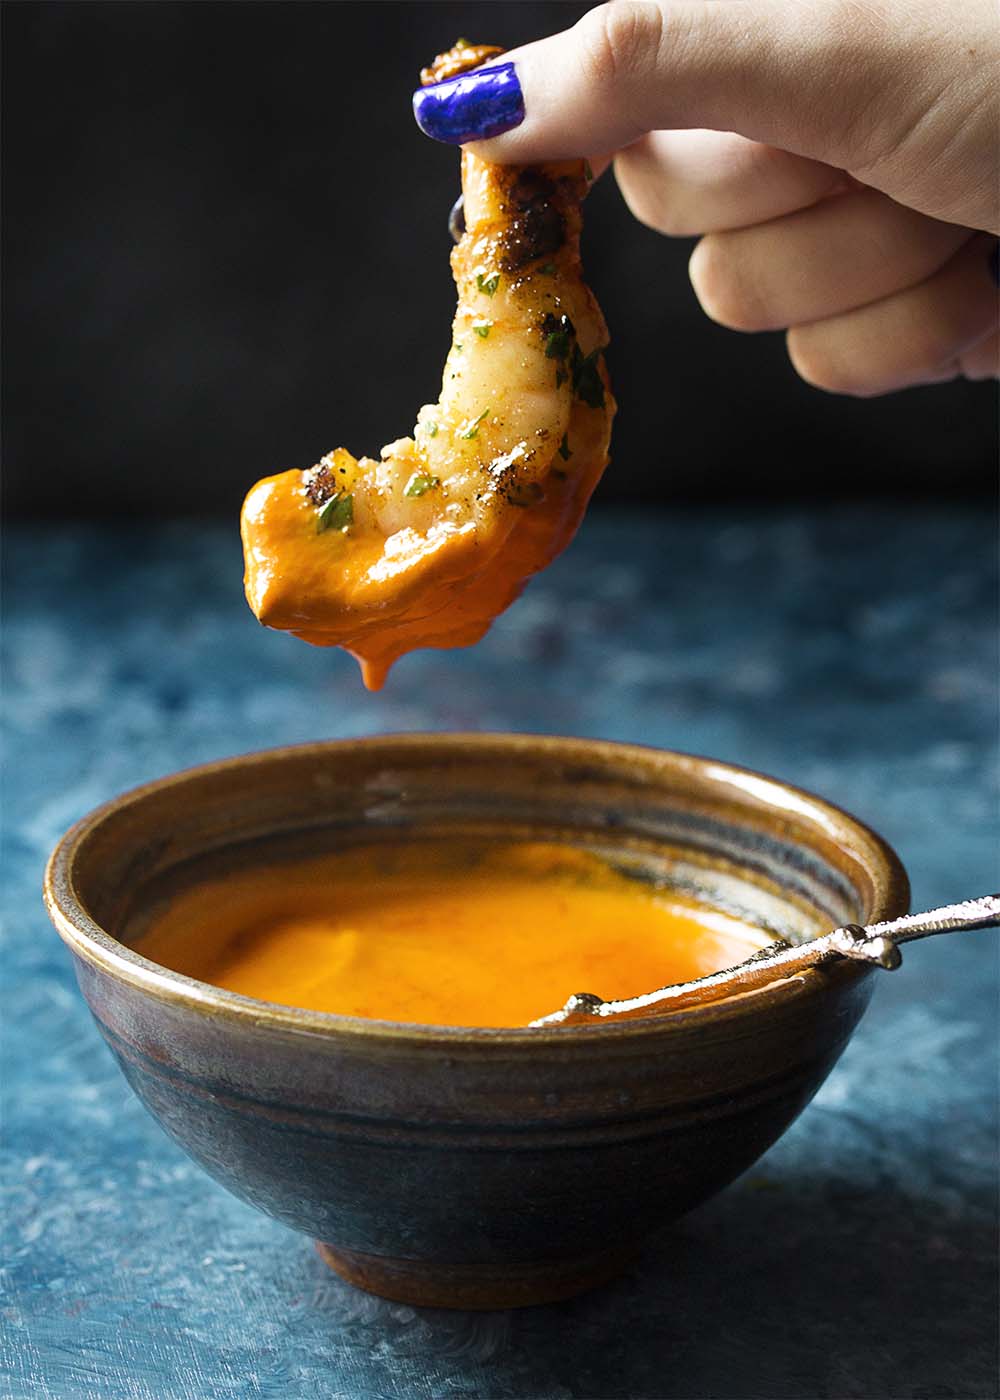 An hand holding up a grilled shrimp in the air just above a bowl of dipping sauce. Dipping sauce is dripping off the shrimp.